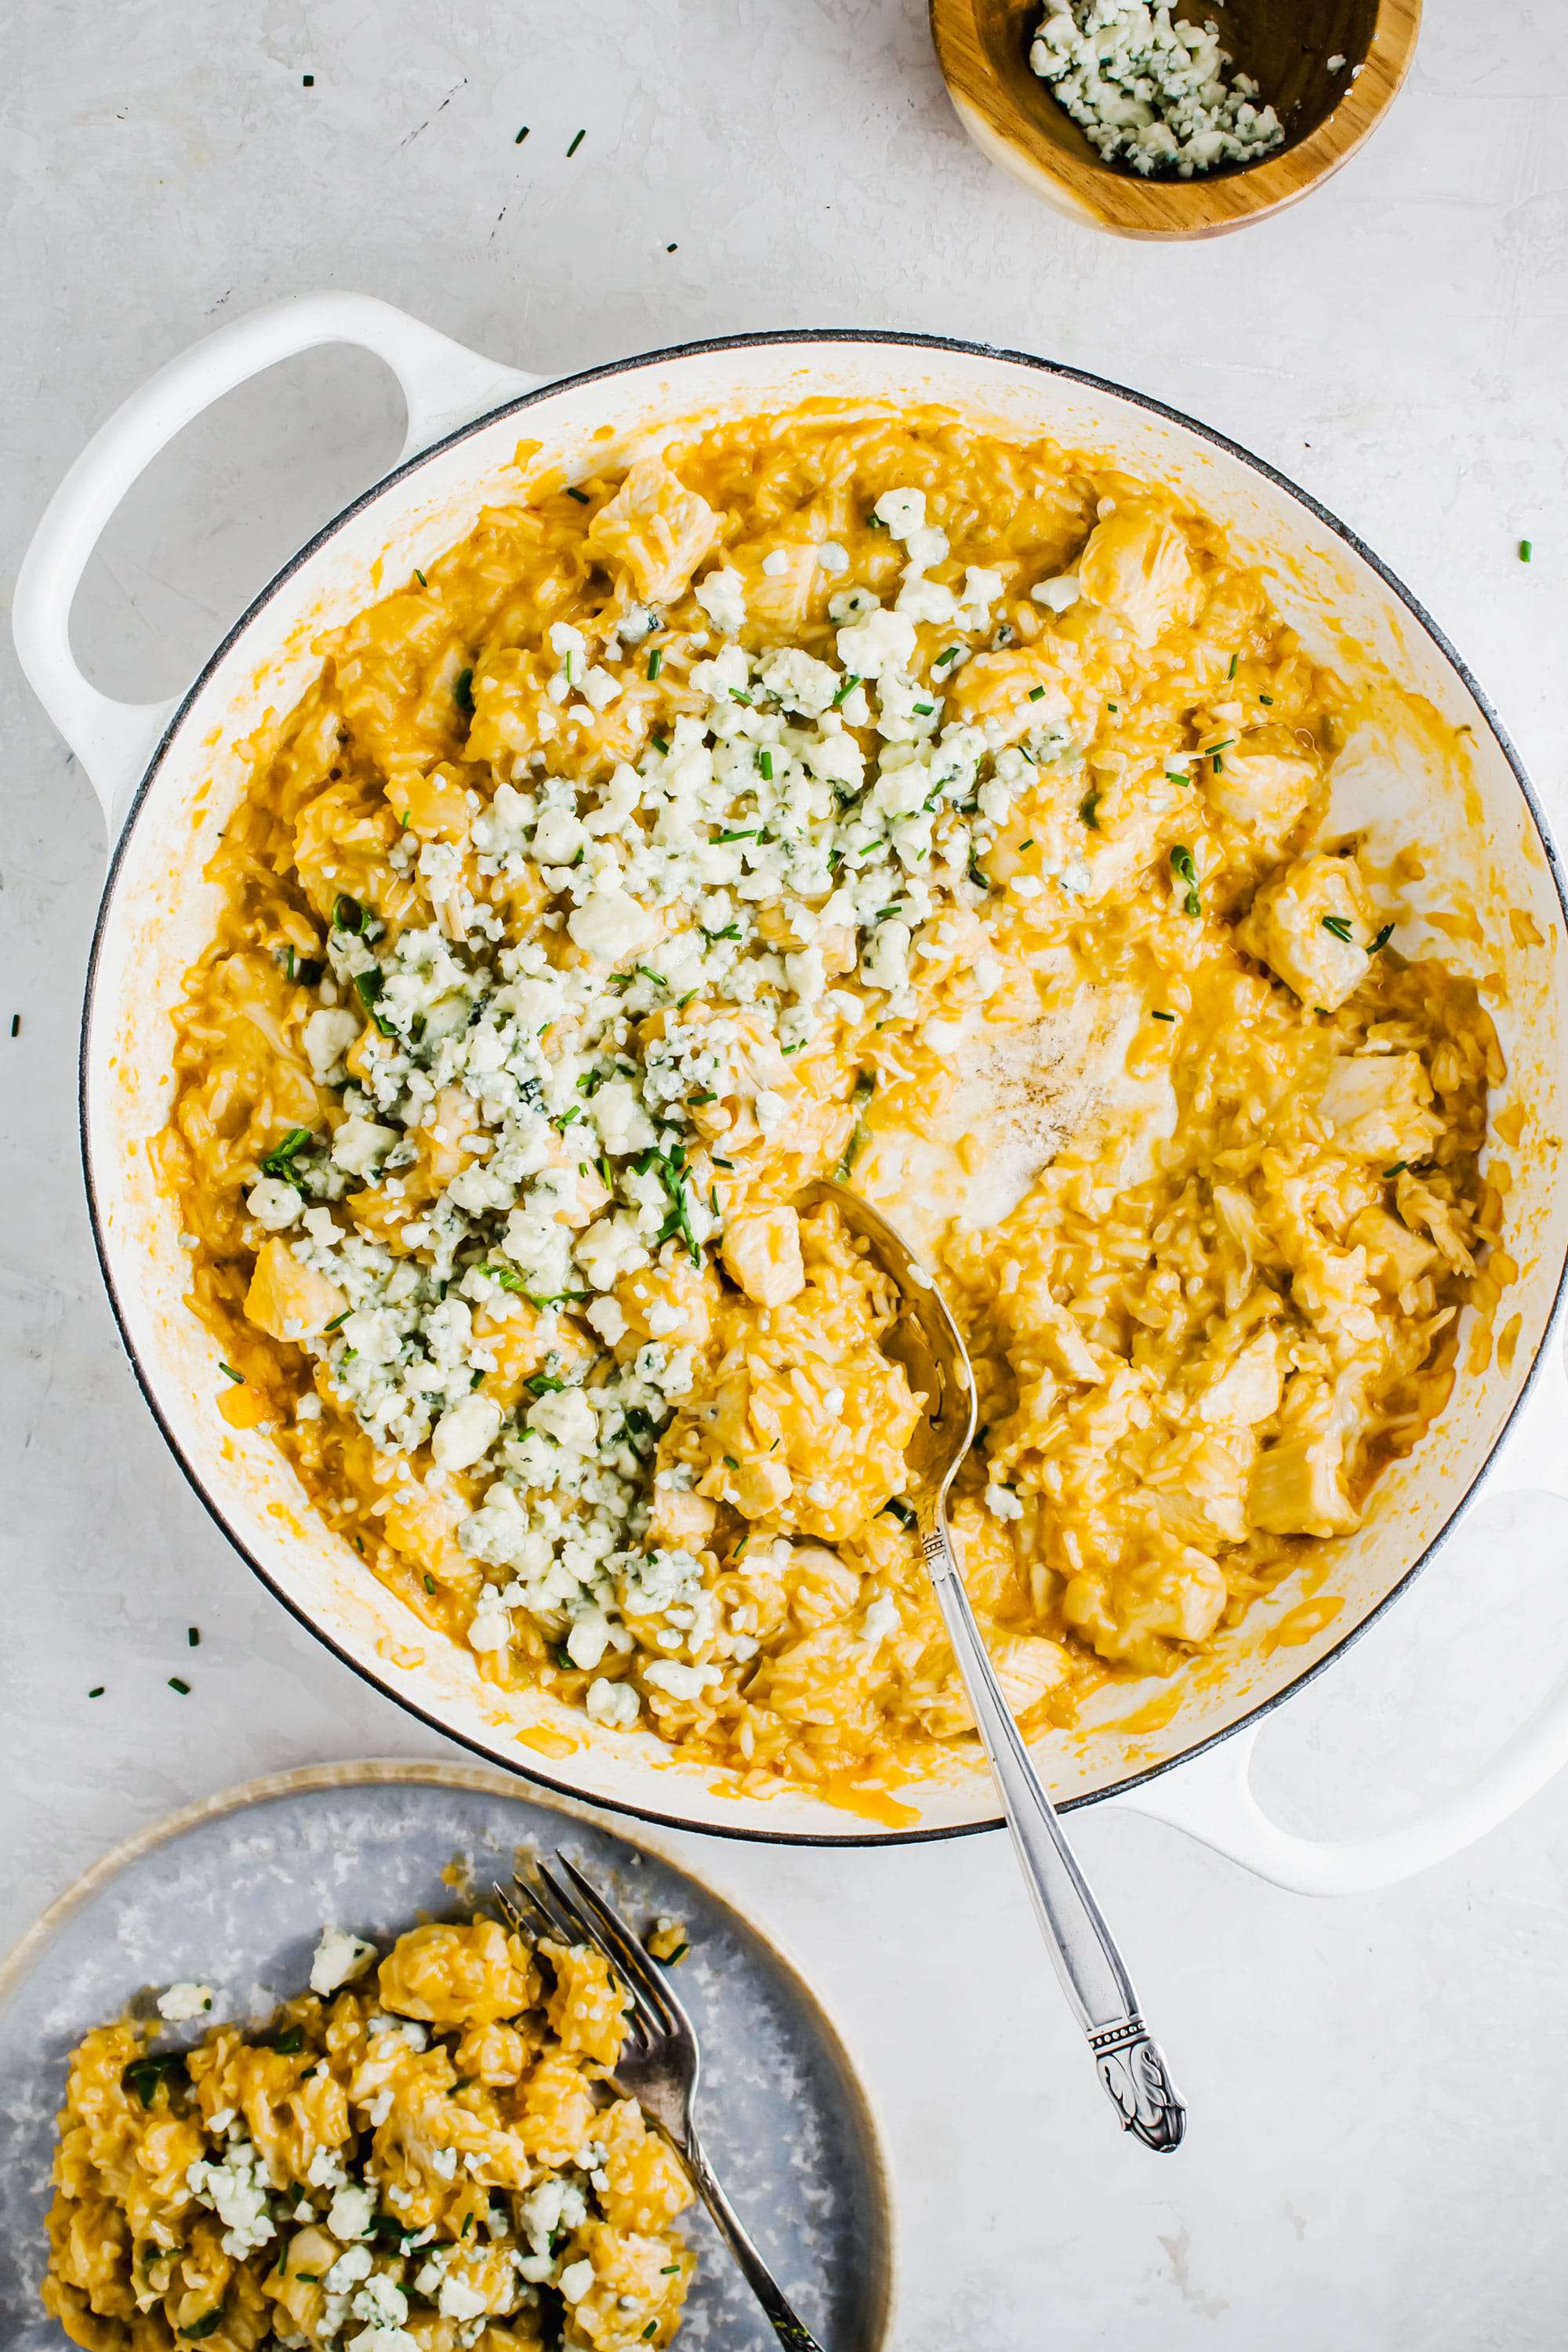 Buffalo Chicken and Rice Skillet